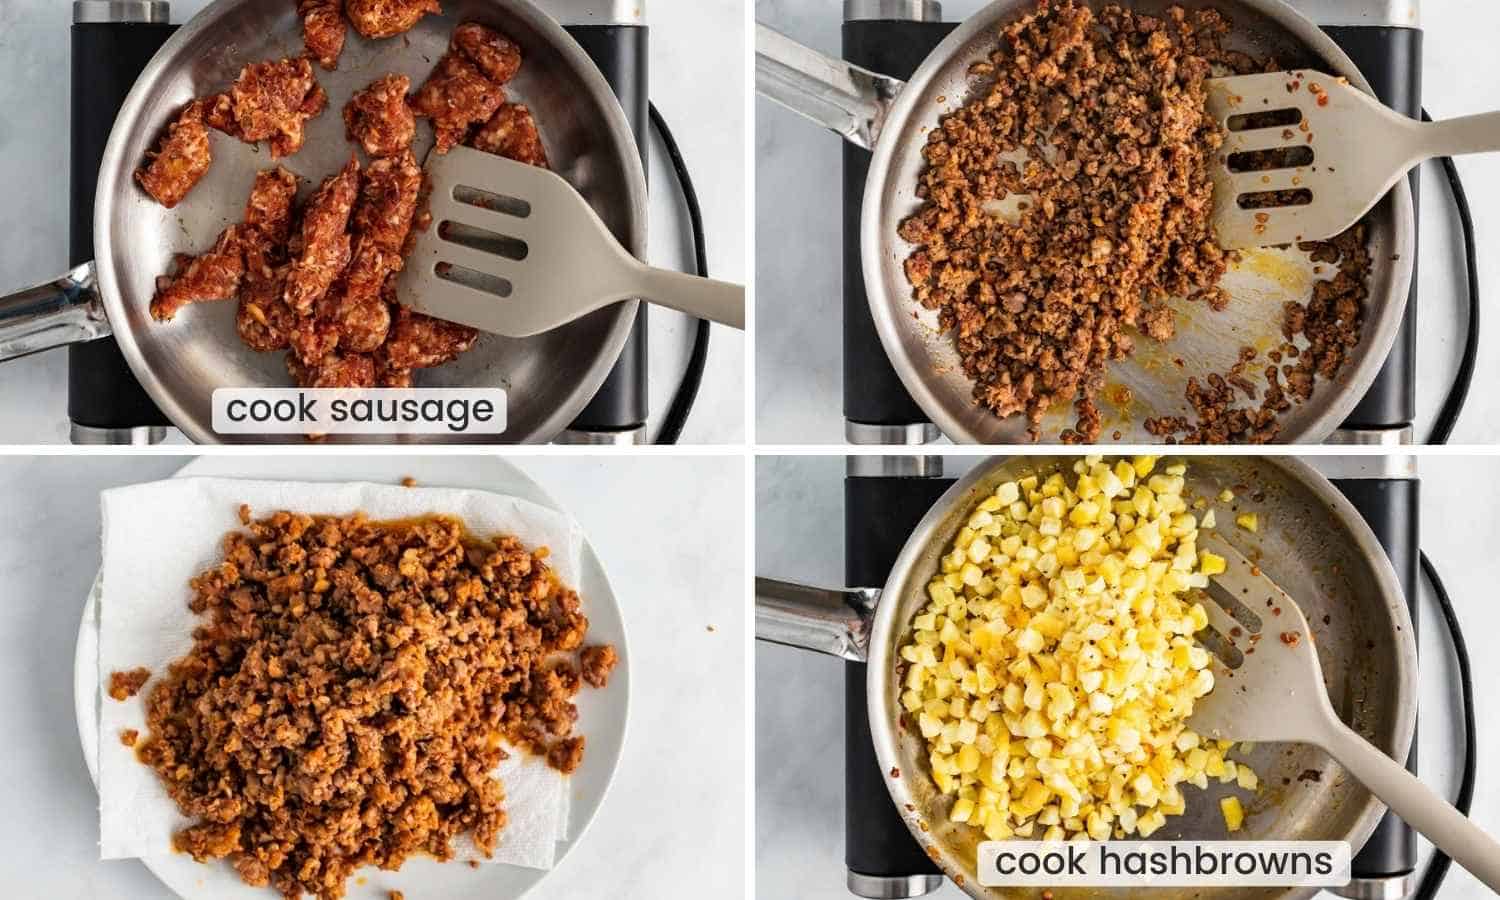 Collage with four images showing how to cook sausage and hashbrowns in a pan